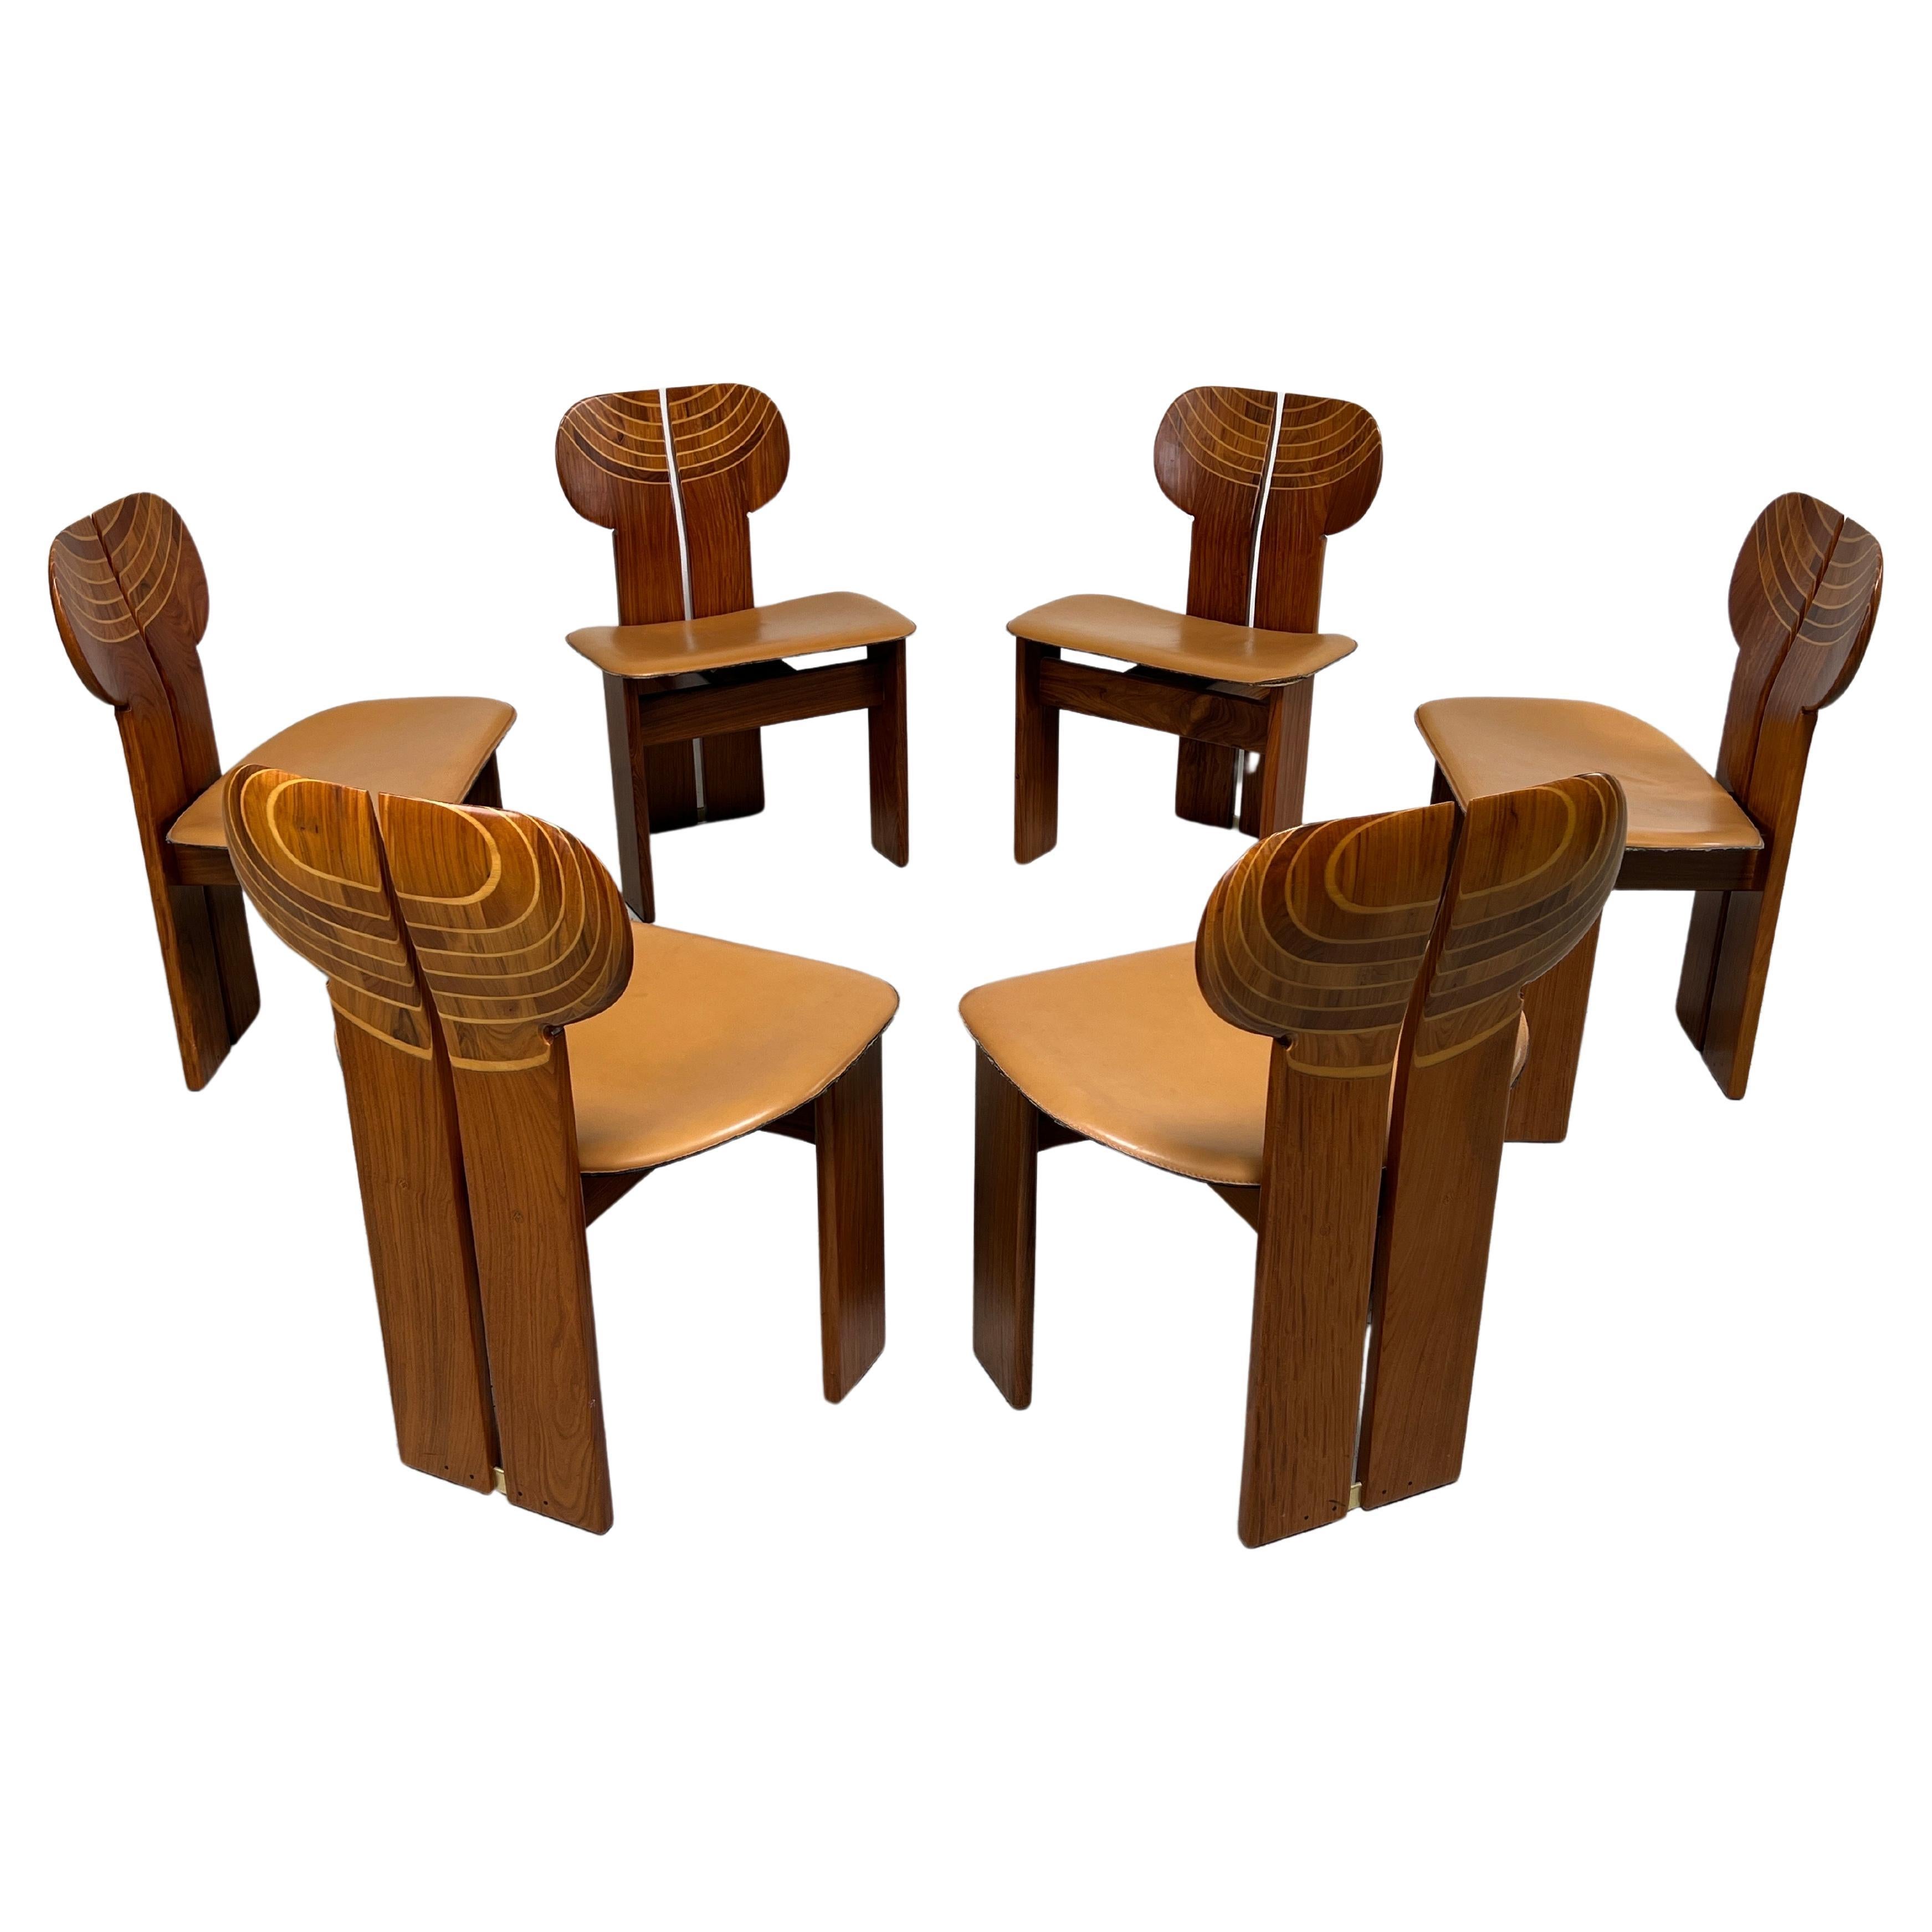 Afra & Tobia Scarpa "Africa" Dining Chairs for Maxalto, 1975, Set of 6